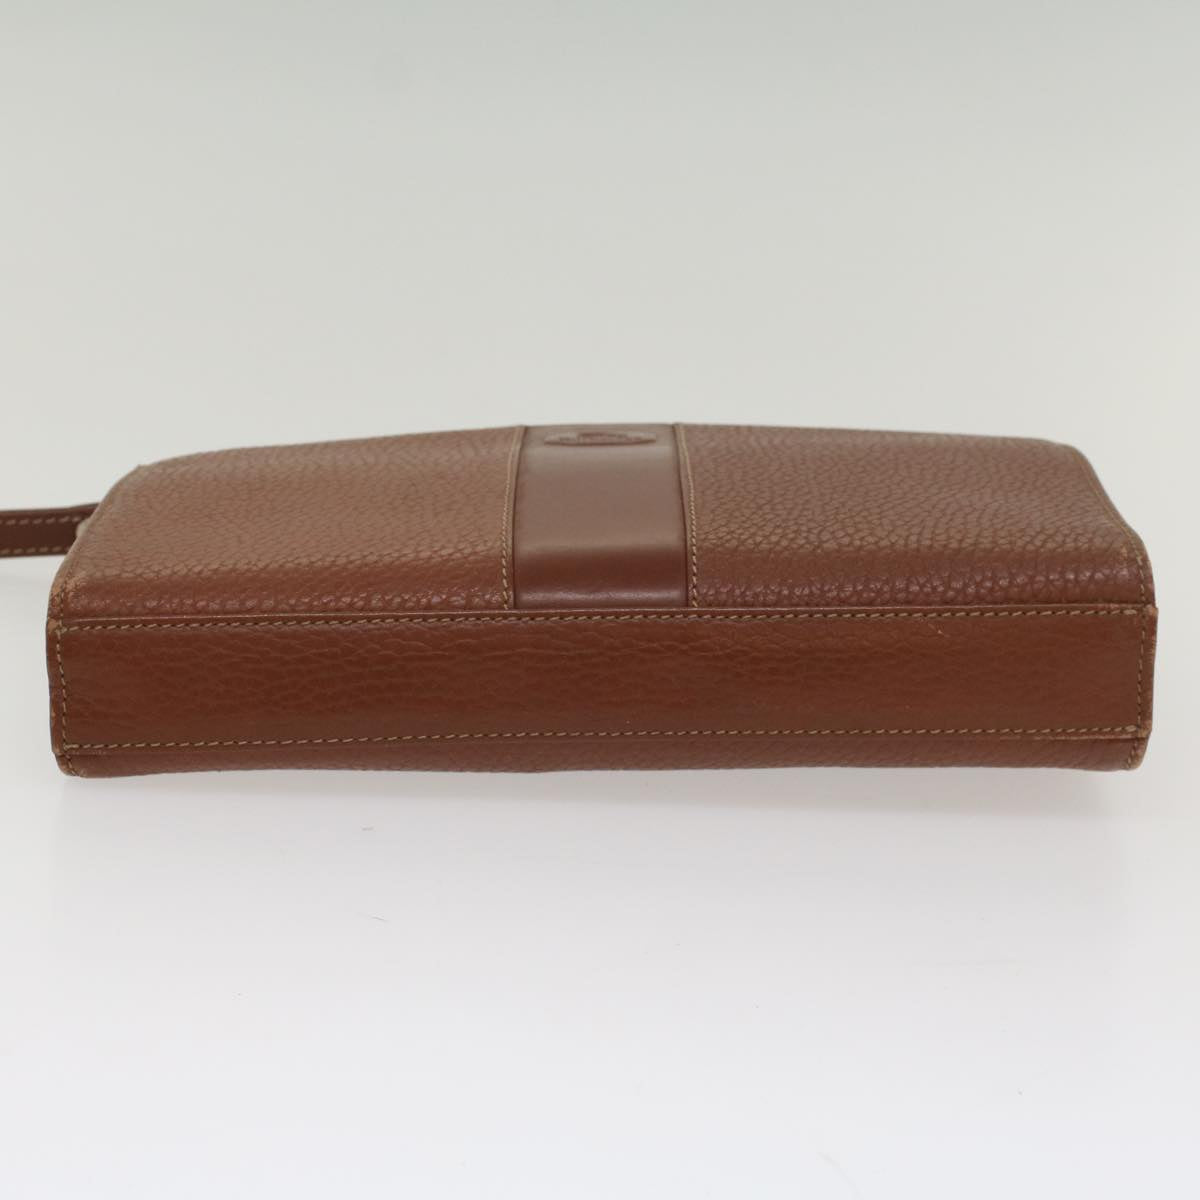 Burberrys Clutch Bag Leather Brown Auth bs8539